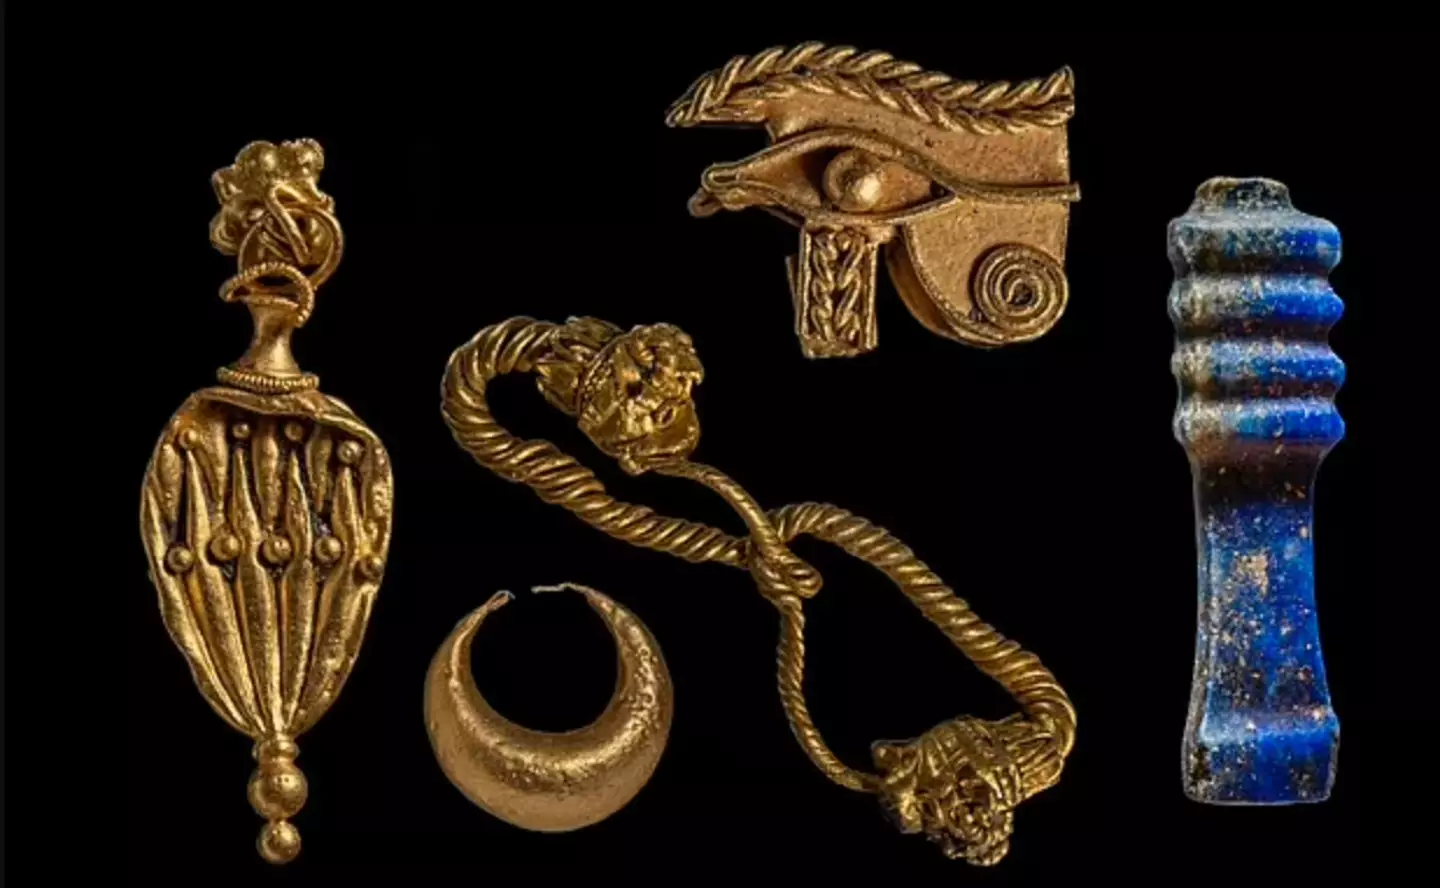 New objects including gold jewellery have been found.